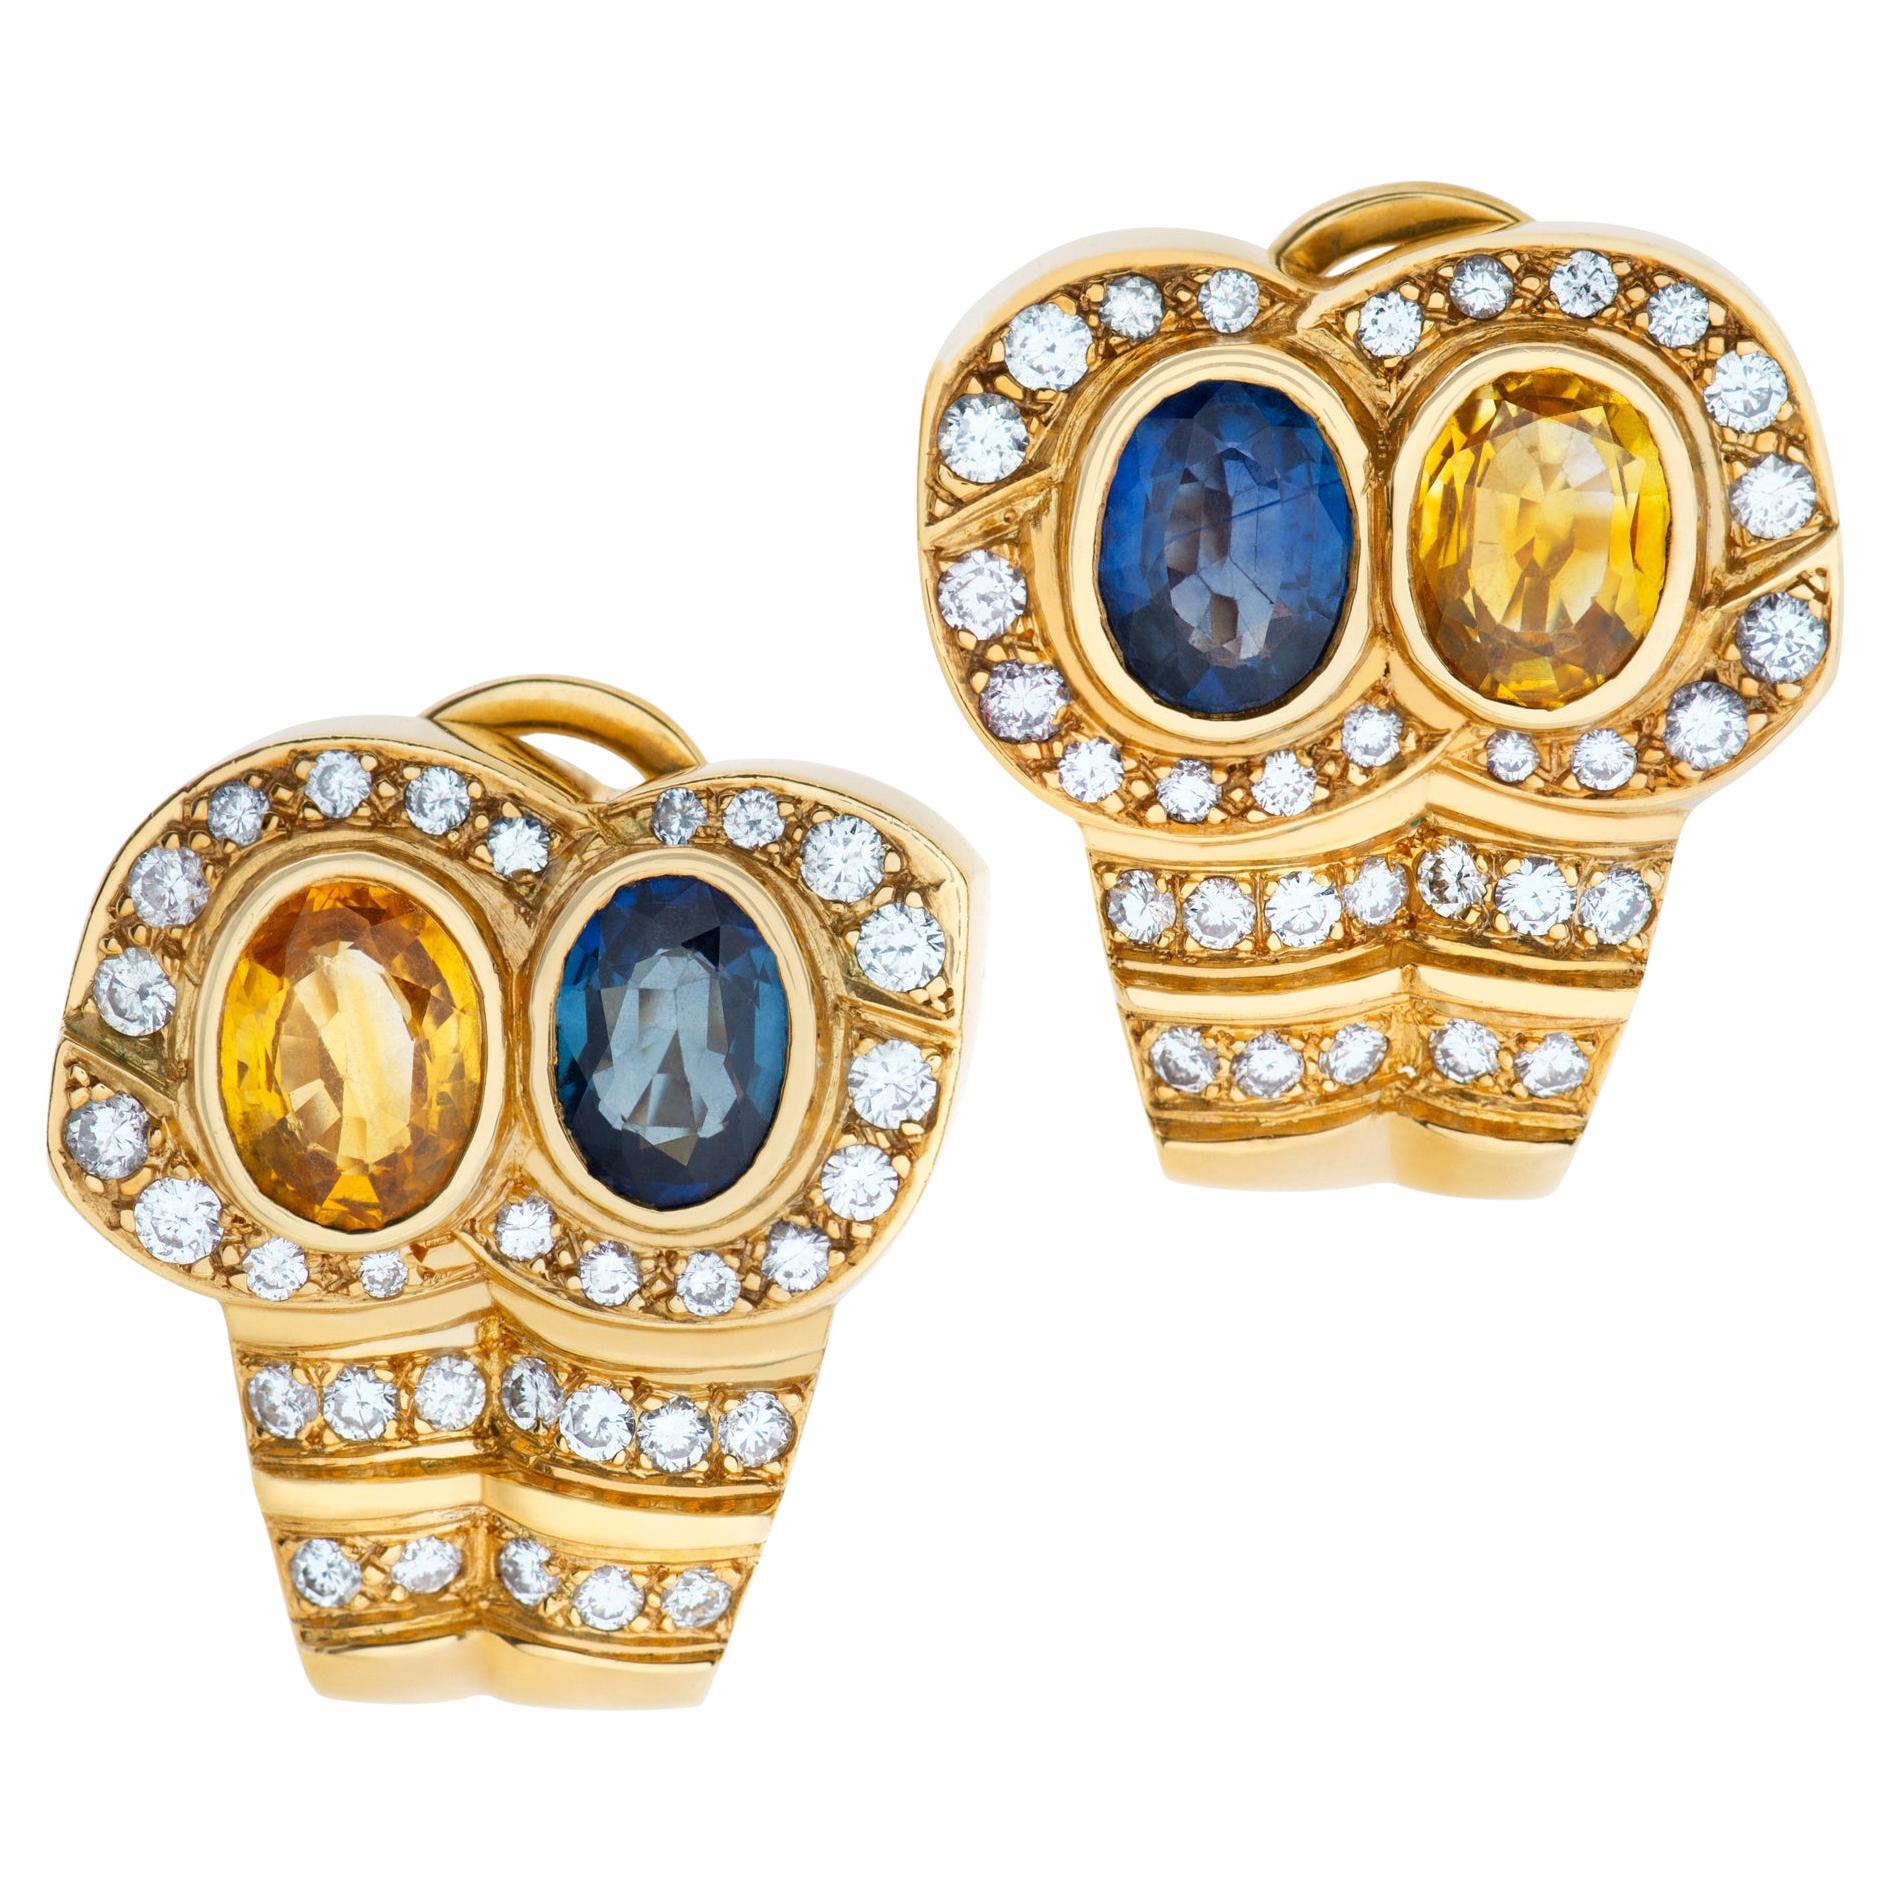 Colorful Ring & Earrings Set, with Brilliant Cut Oval Citrine, Blue Topaz & Roun For Sale